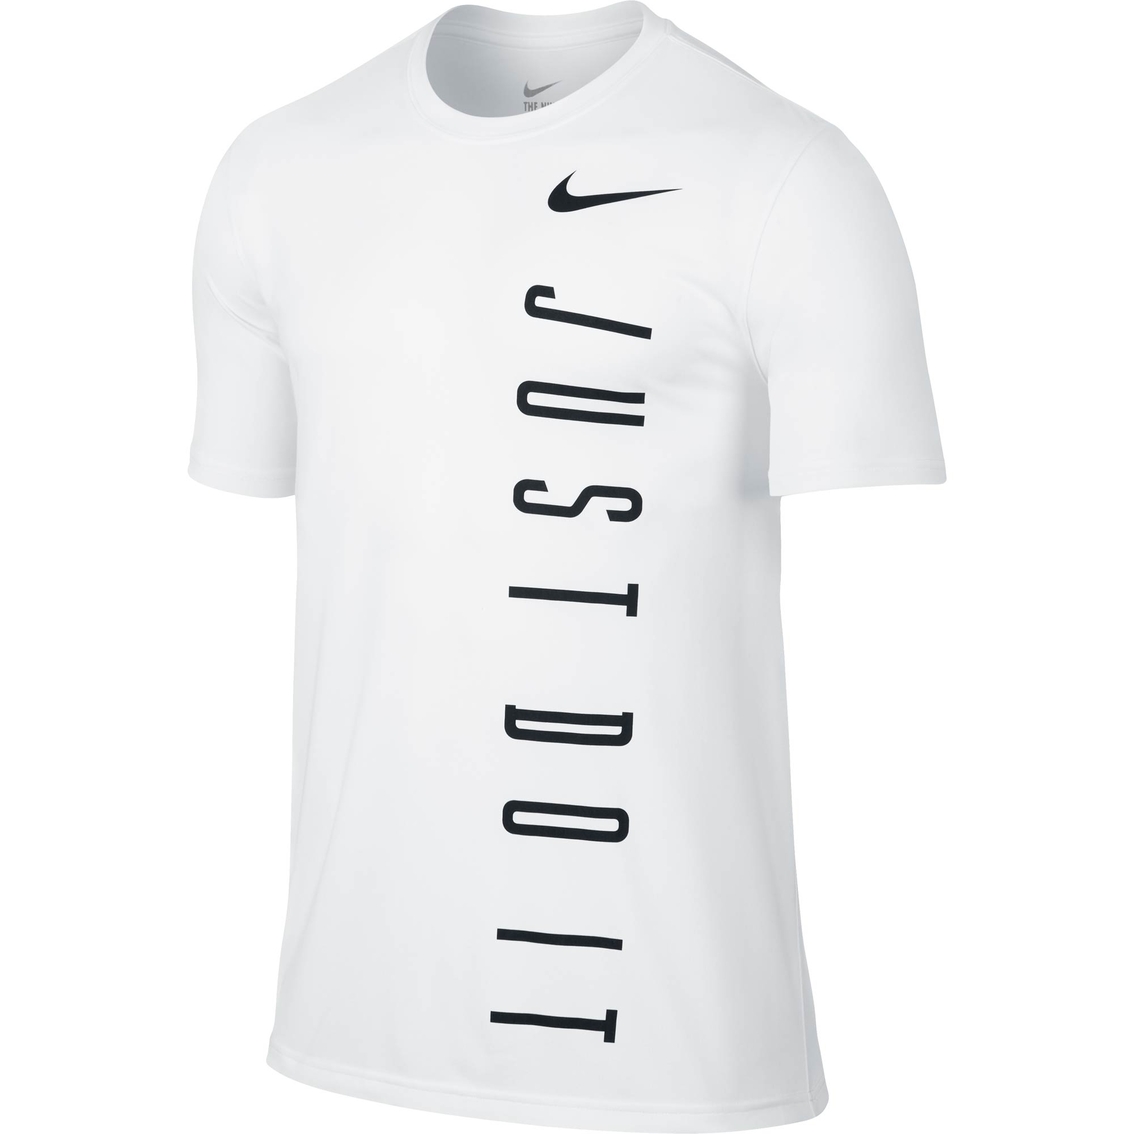 Nike Legend 2.0 Vertical Just Do It Tee | Shirts | Clothing ...